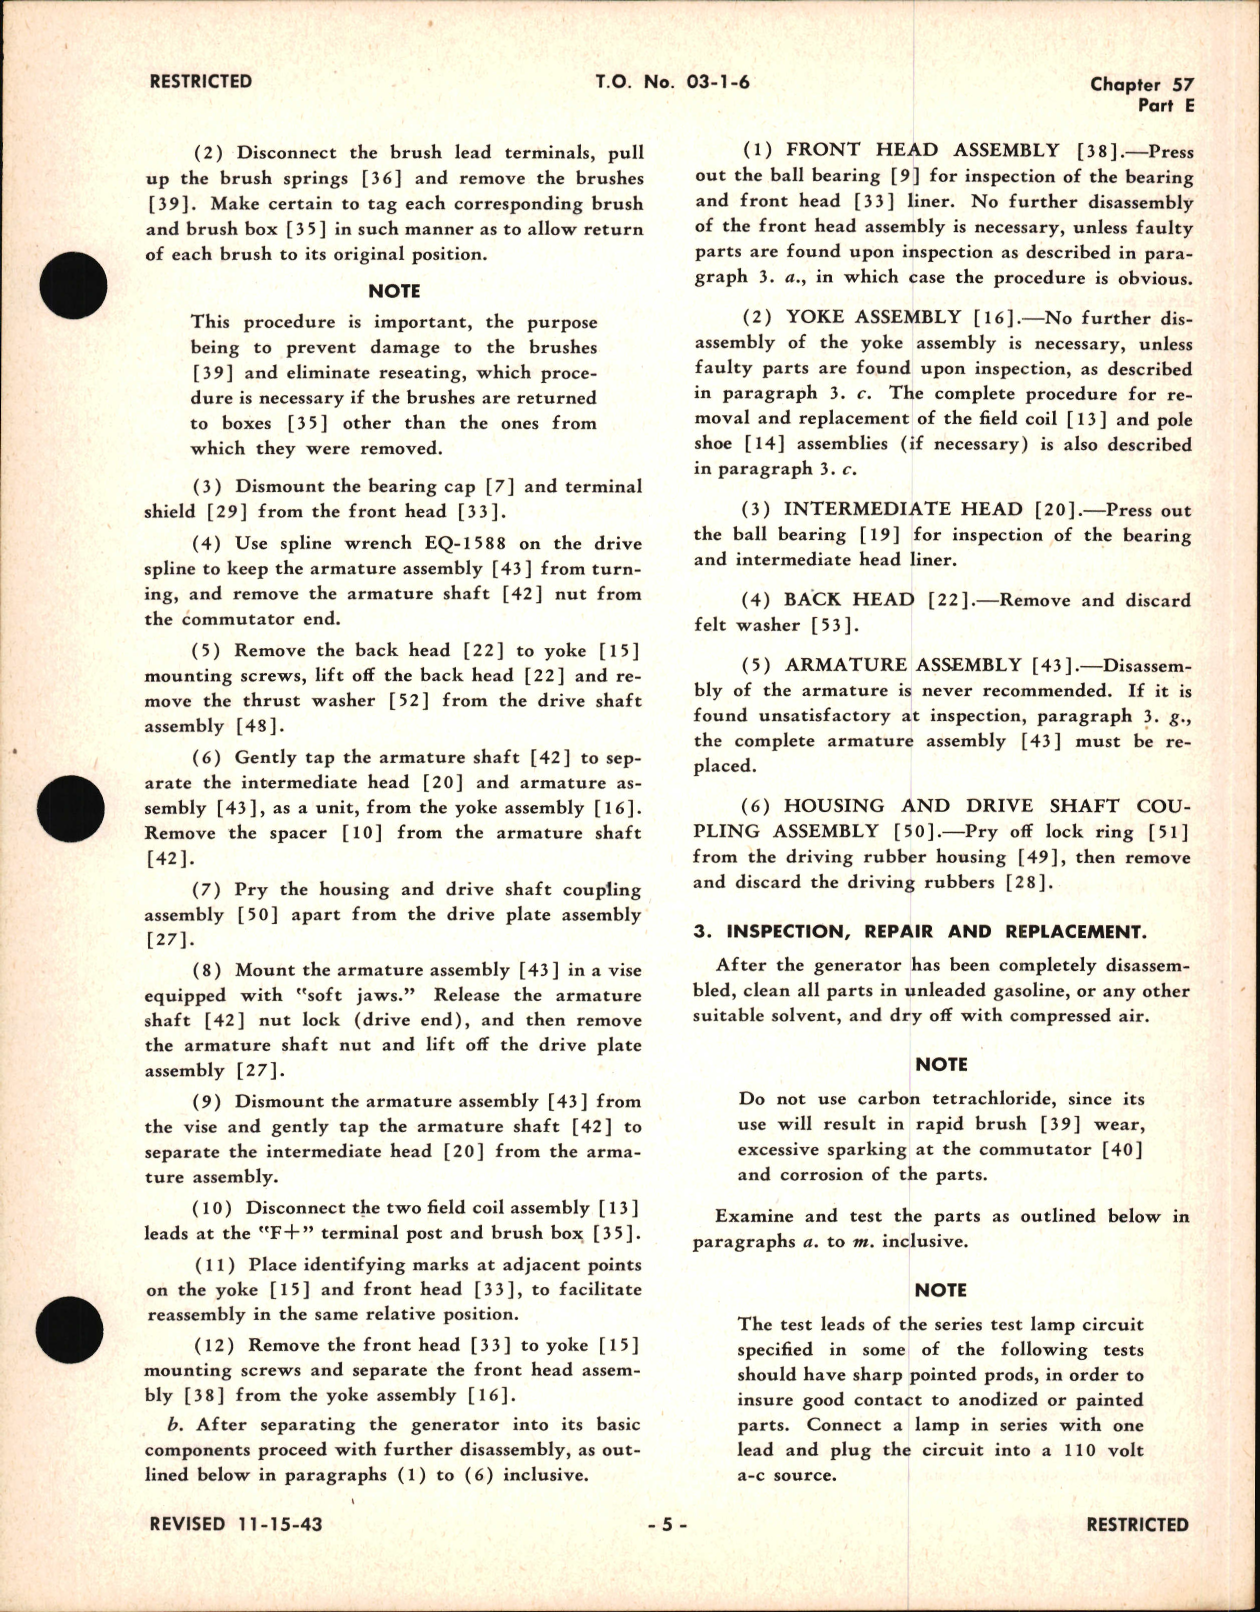 Sample page 5 from AirCorps Library document: Overhaul Instructions for Engine Driven Single Voltage High Field Current D.C. Generator, Ch 57 Part E